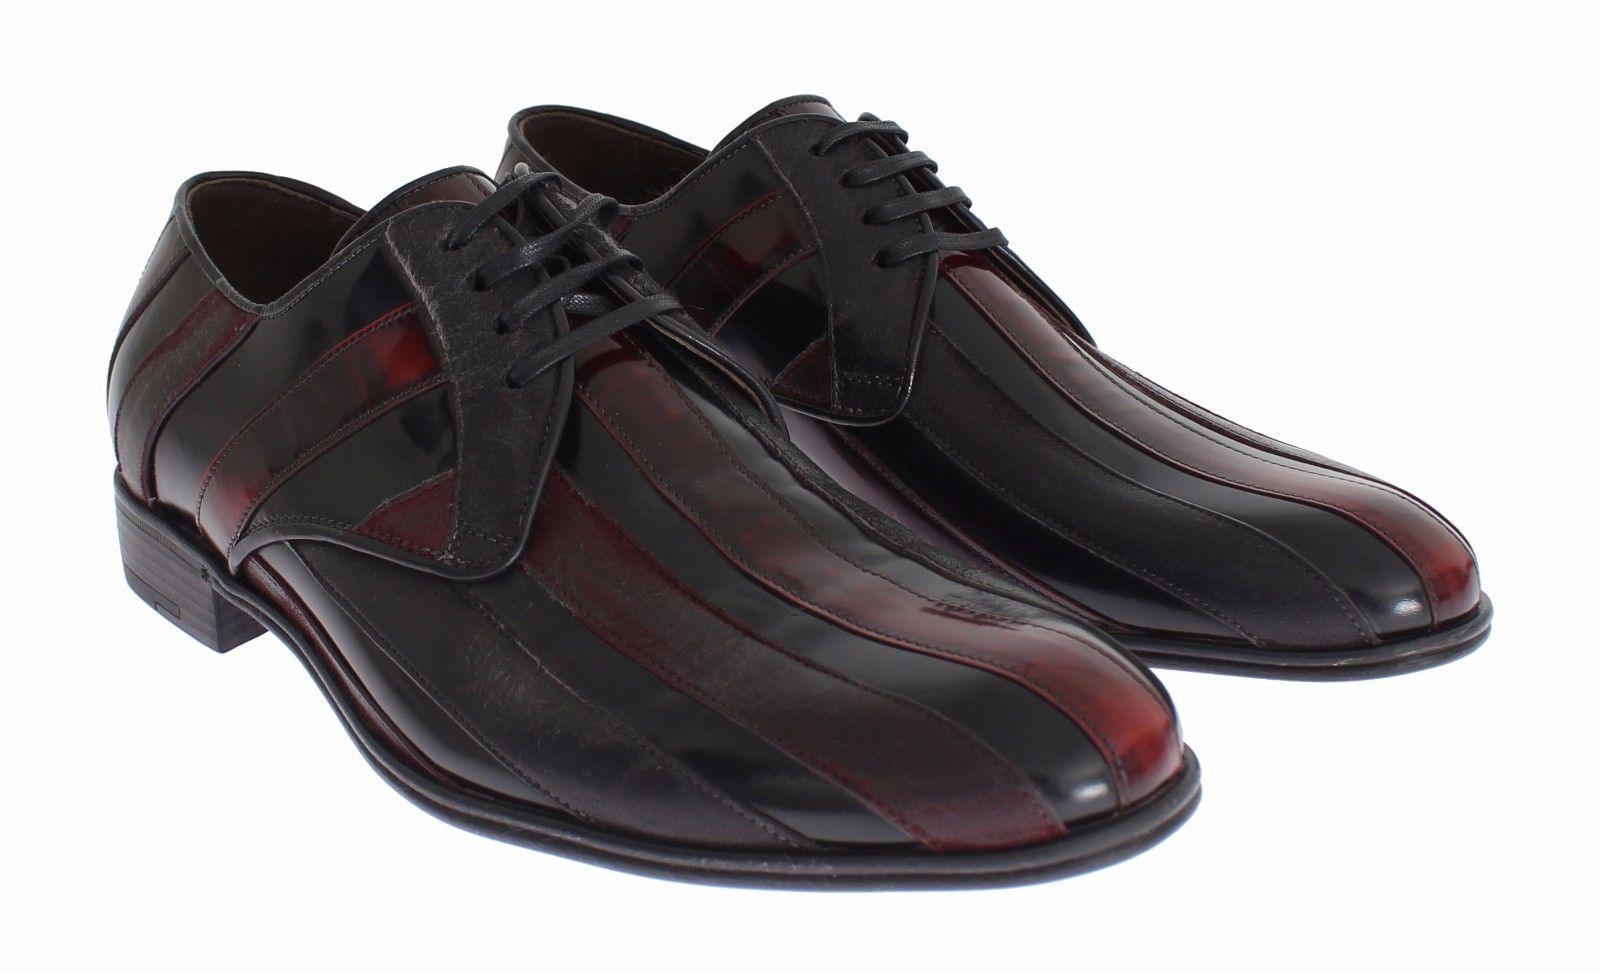 Black Bordeaux Leather Dress Formal Shoes - Designed by Dolce & Gabbana Available to Buy at a Discounted Price on Moon Behind The Hill Online Designer Discount Store